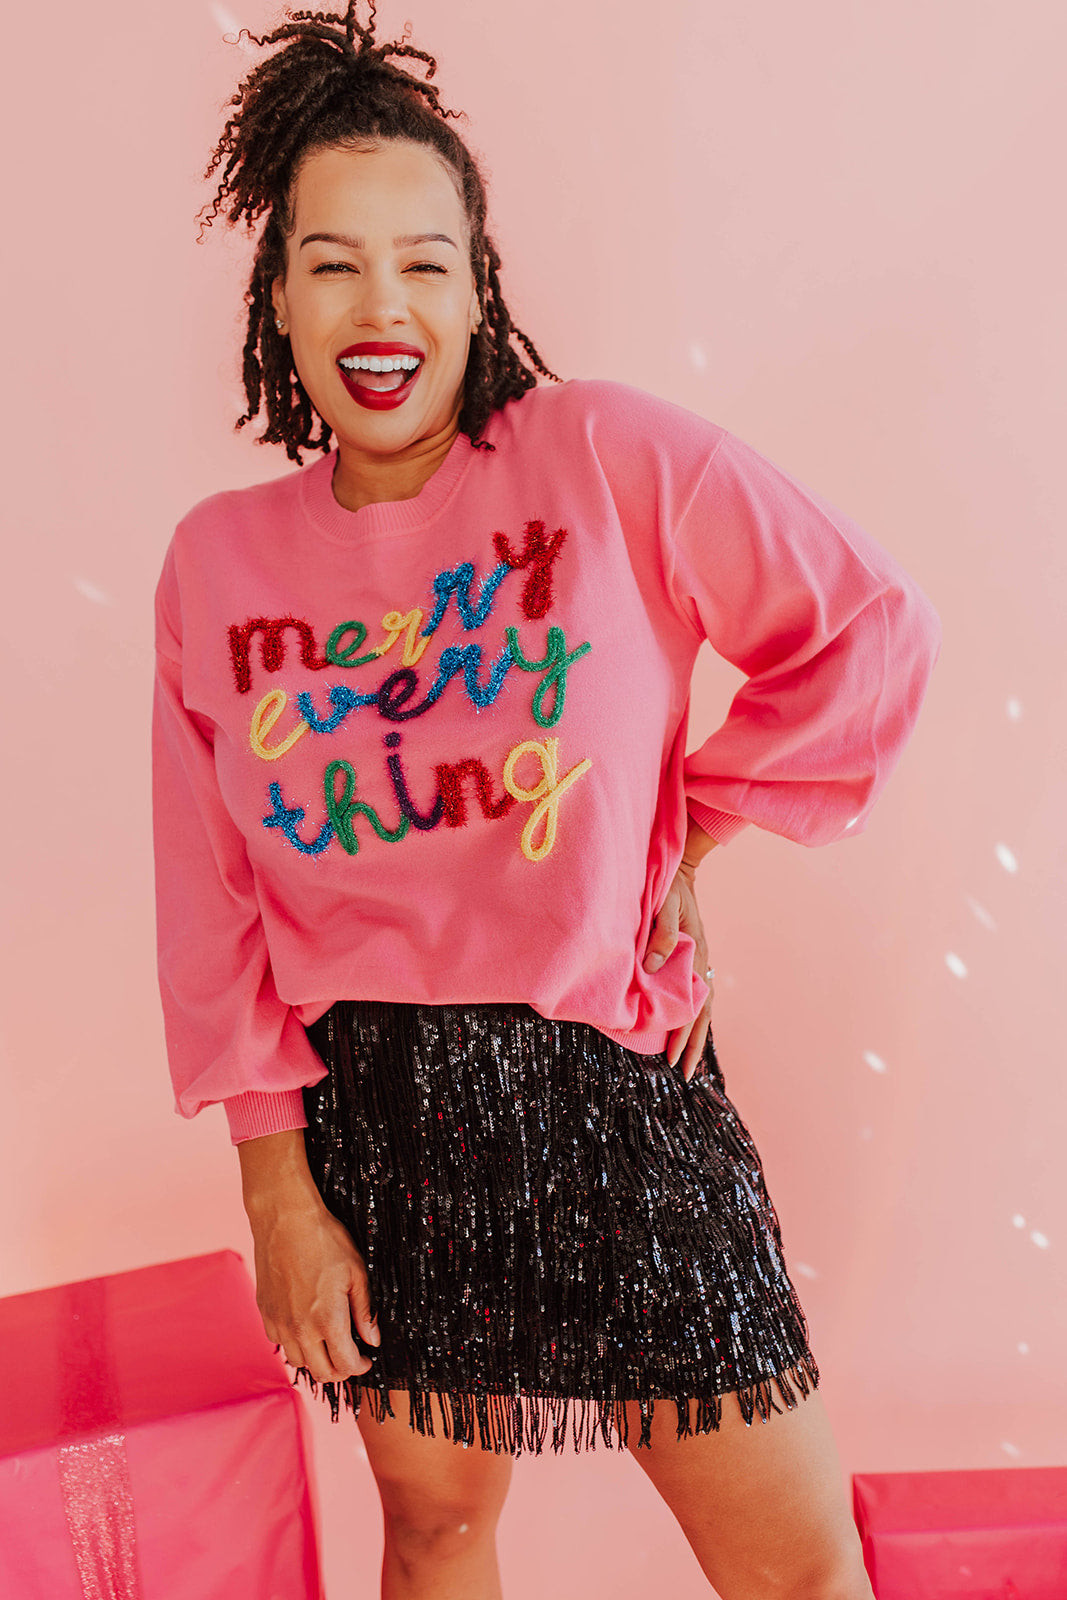 THE MERRY EVERYTHING TINSEL SWEATER IN PINK